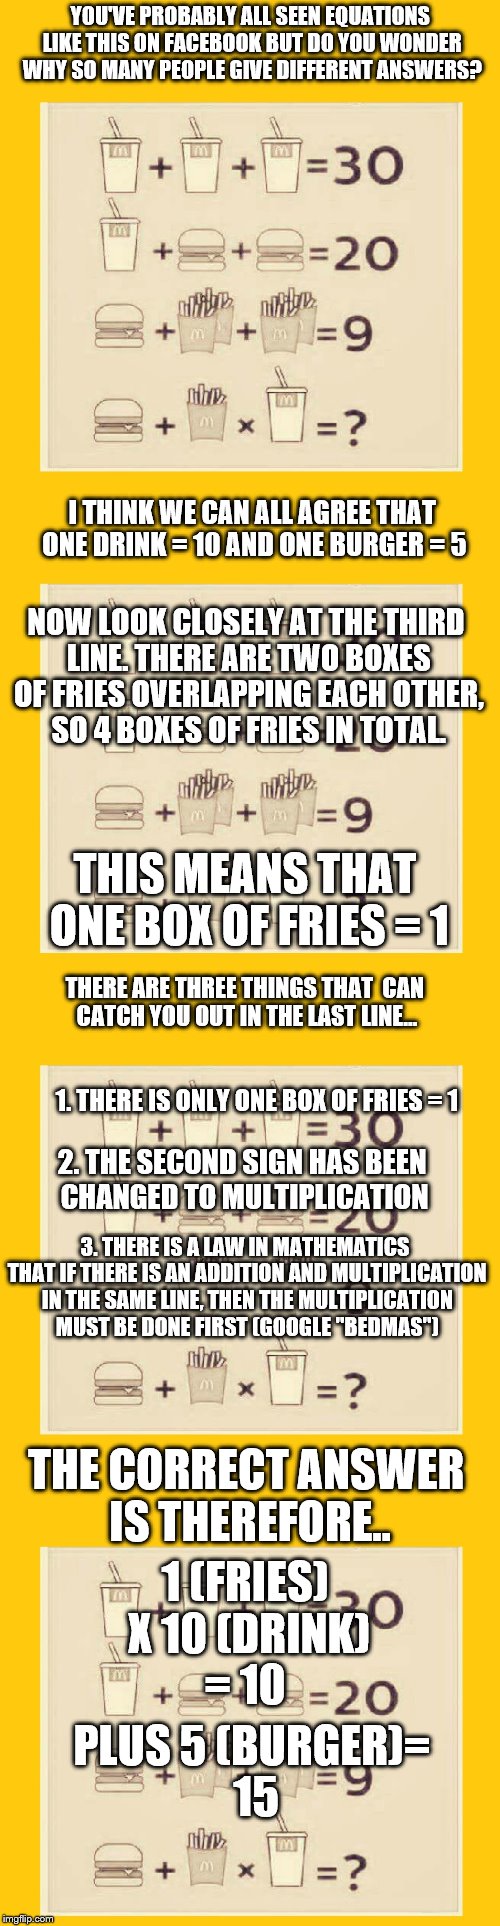 Happy meal | YOU'VE PROBABLY ALL SEEN EQUATIONS LIKE THIS ON FACEBOOK BUT DO YOU WONDER WHY SO MANY PEOPLE GIVE DIFFERENT ANSWERS? I THINK WE CAN ALL AGREE THAT ONE DRINK = 10 AND ONE BURGER = 5; NOW LOOK CLOSELY AT THE THIRD LINE. THERE ARE TWO BOXES OF FRIES OVERLAPPING EACH OTHER, SO 4 BOXES OF FRIES IN TOTAL. THIS MEANS THAT ONE BOX OF FRIES = 1; THERE ARE THREE THINGS THAT  CAN CATCH YOU OUT IN THE LAST LINE... 1. THERE IS ONLY ONE BOX OF FRIES = 1; 2. THE SECOND SIGN HAS BEEN CHANGED TO MULTIPLICATION; 3. THERE IS A LAW IN MATHEMATICS THAT IF THERE IS AN ADDITION AND MULTIPLICATION IN THE SAME LINE, THEN THE MULTIPLICATION MUST BE DONE FIRST (GOOGLE "BEDMAS"); THE CORRECT ANSWER IS THEREFORE.. 1 (FRIES) X 10 (DRINK) = 10; PLUS 5 (BURGER)= 15 | image tagged in pie charts,clever | made w/ Imgflip meme maker